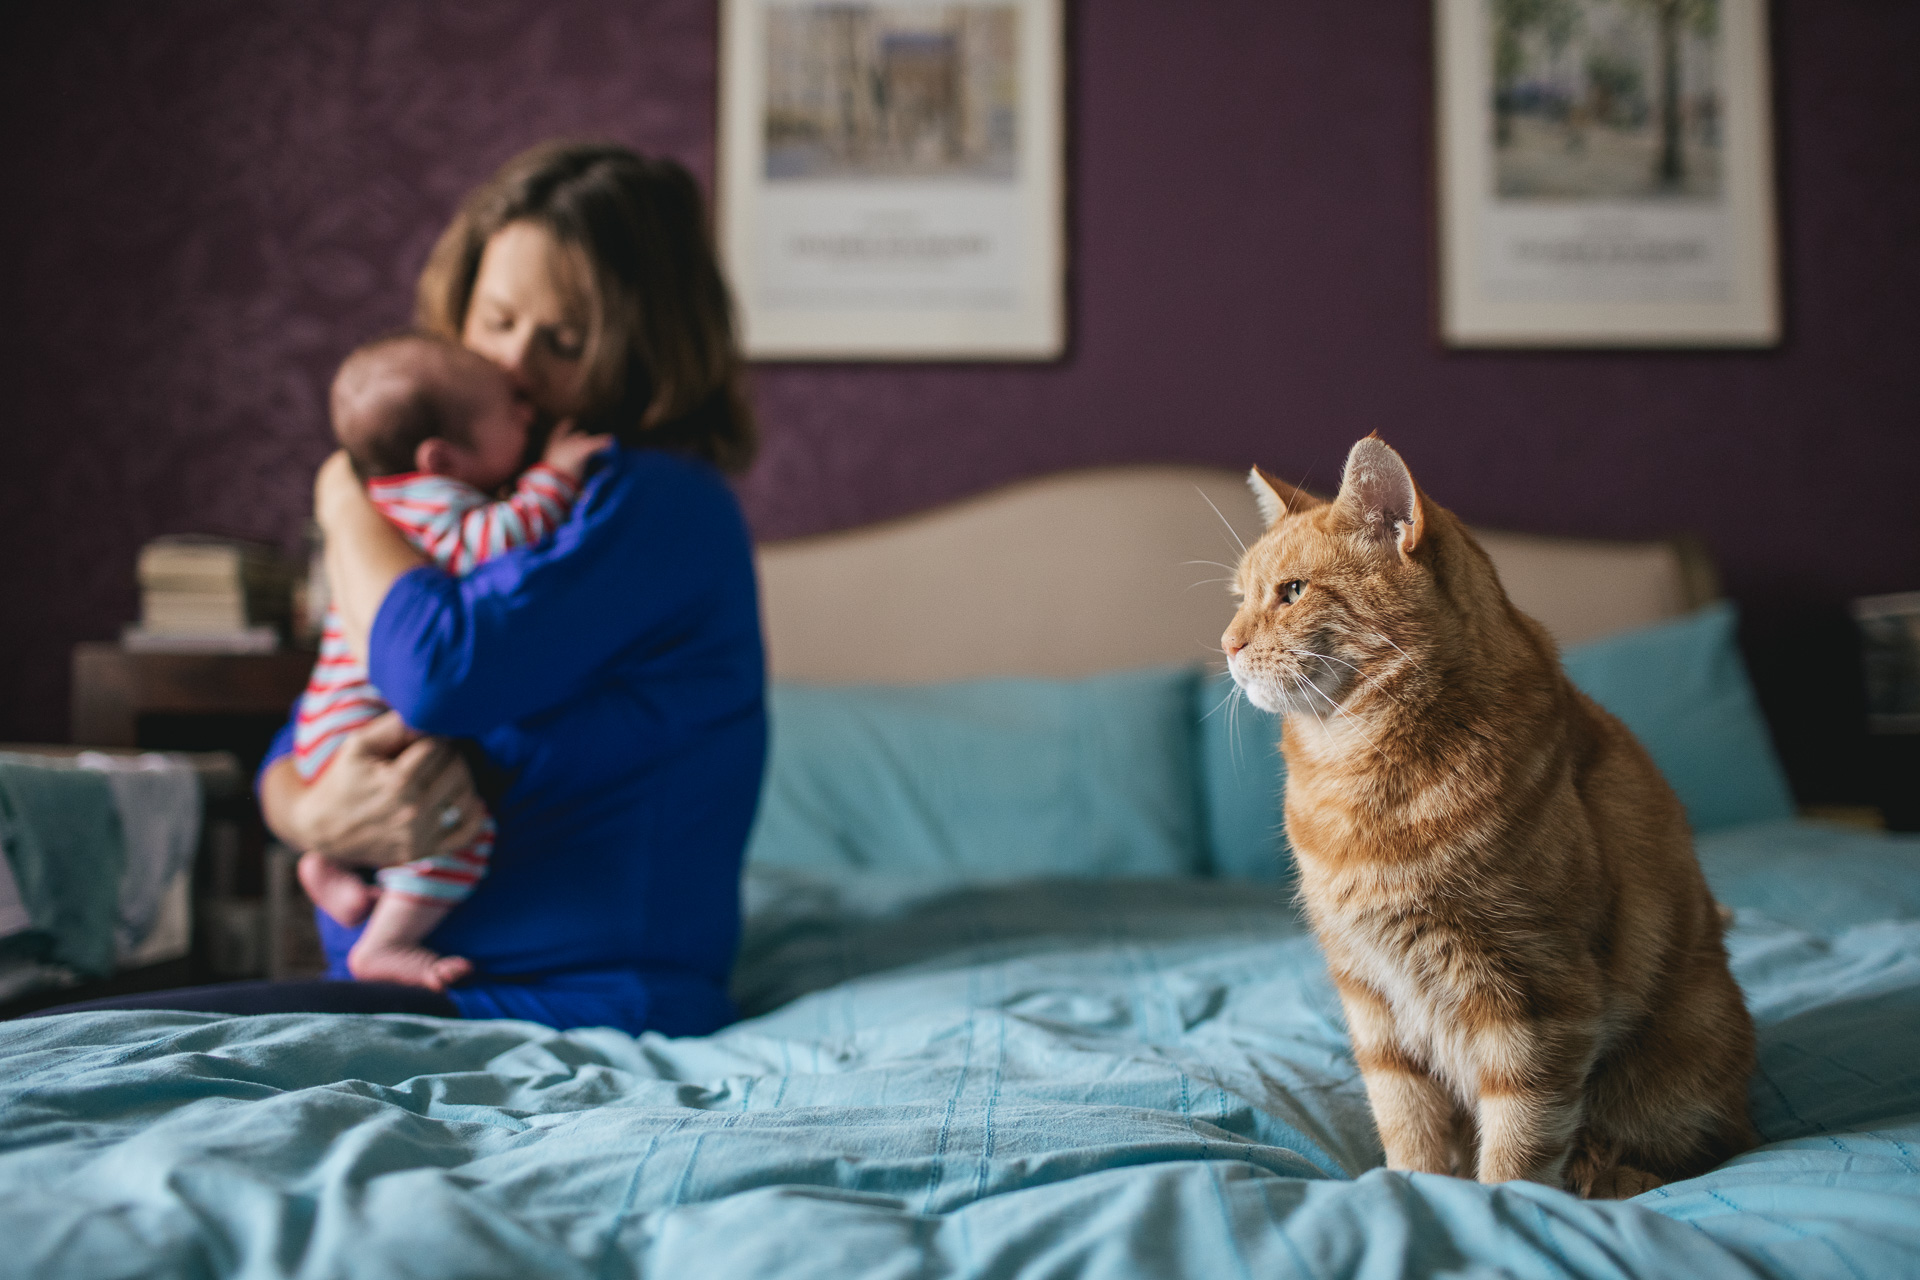 A cat sitting on a bed, with a mother and baby behind